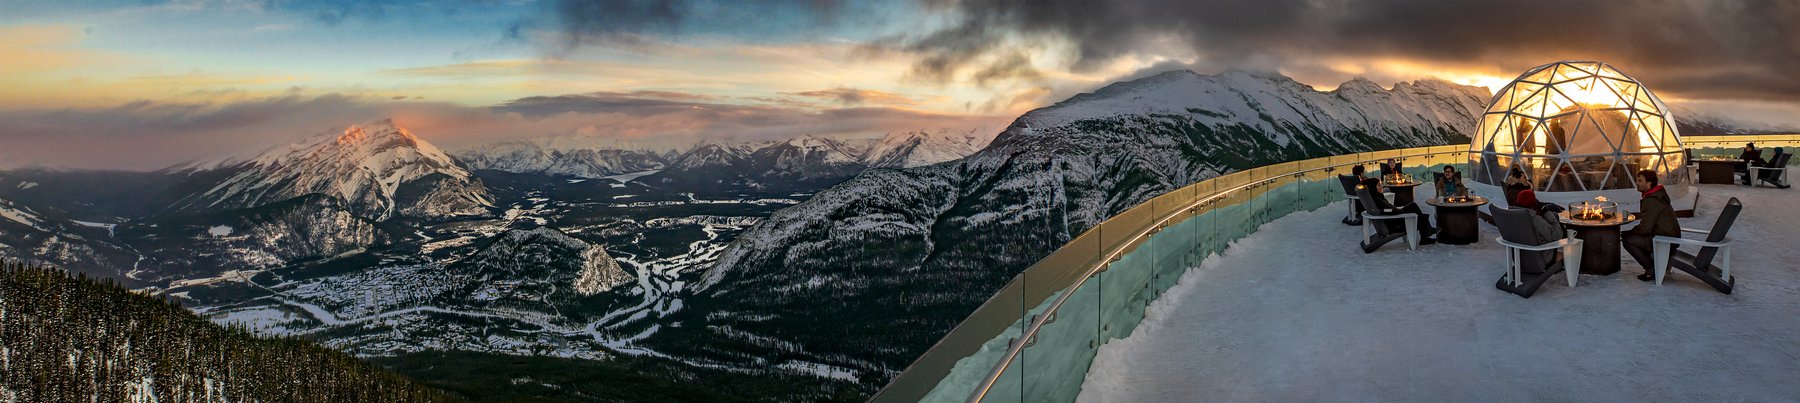 Viewing deck on top of the Banff Gondola